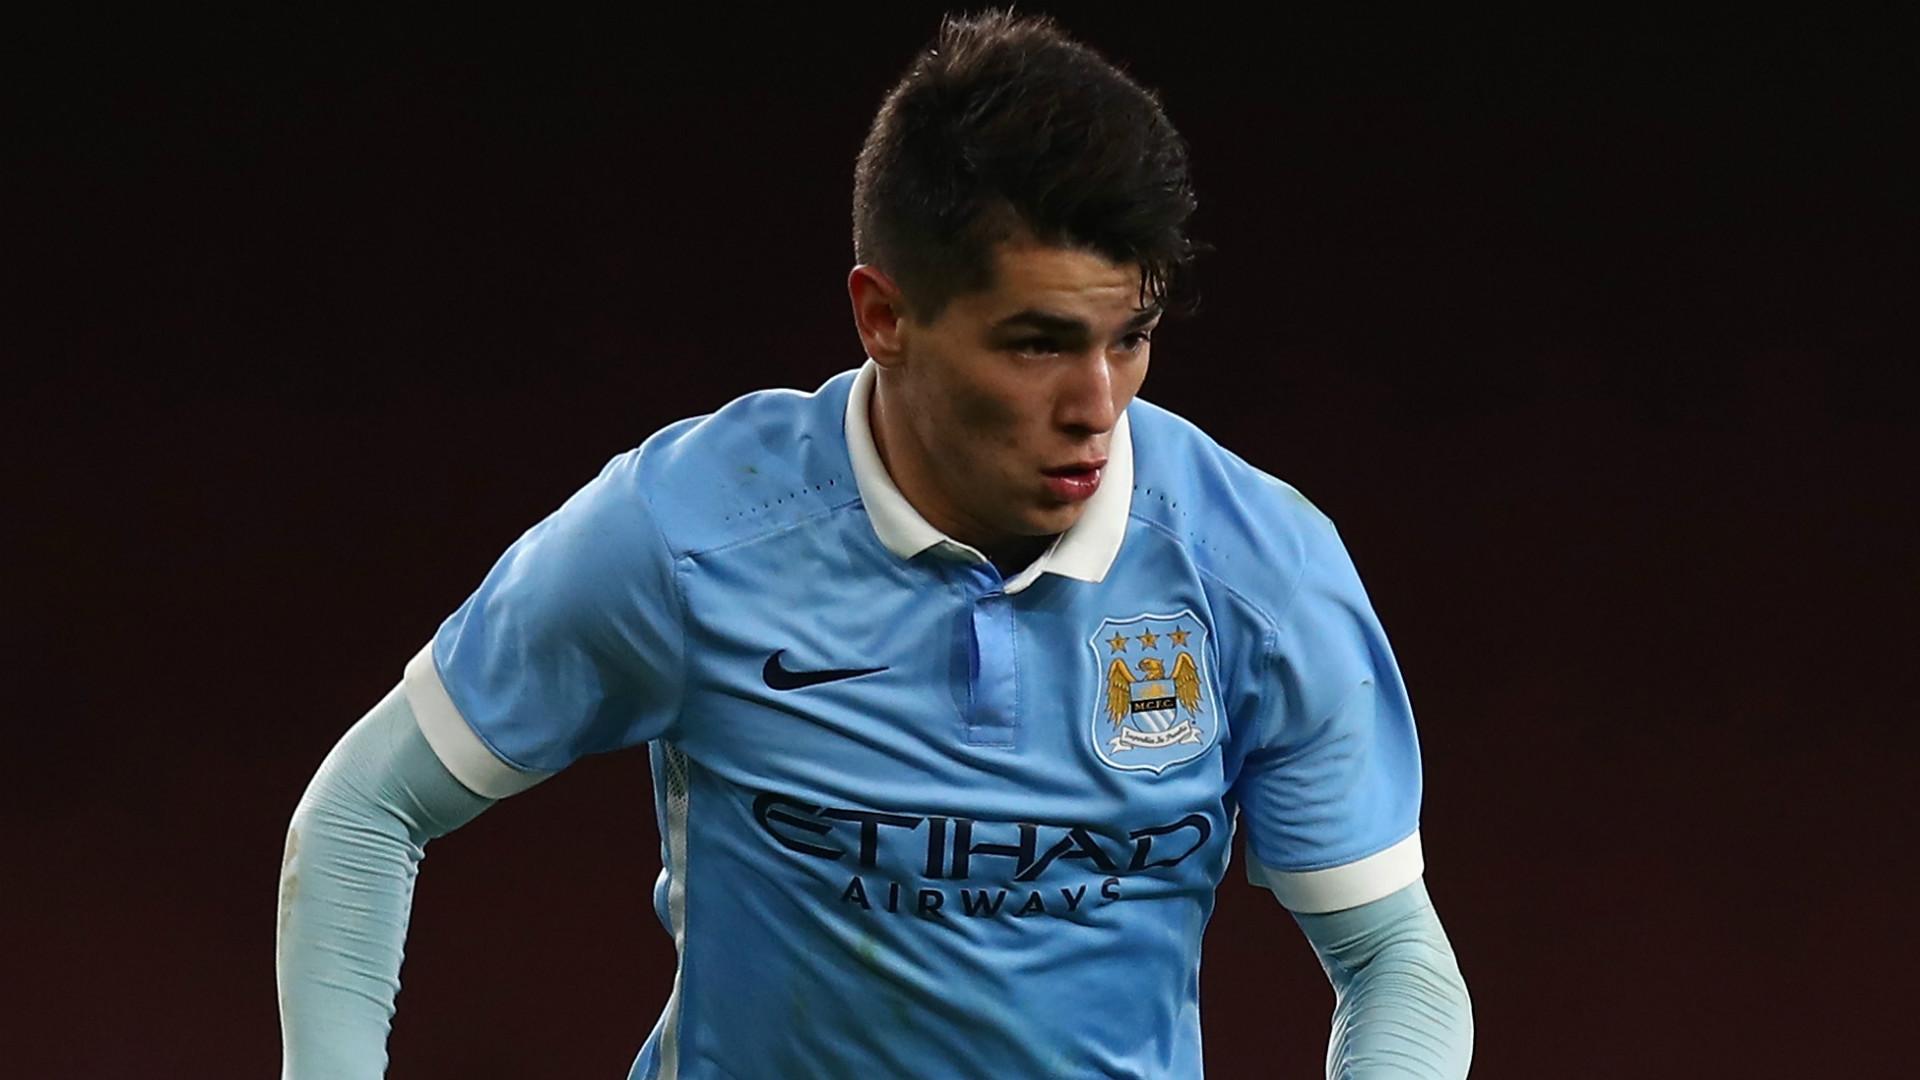 Brahim Diaz shines once more as Man City holds Chelsea in FA Youth